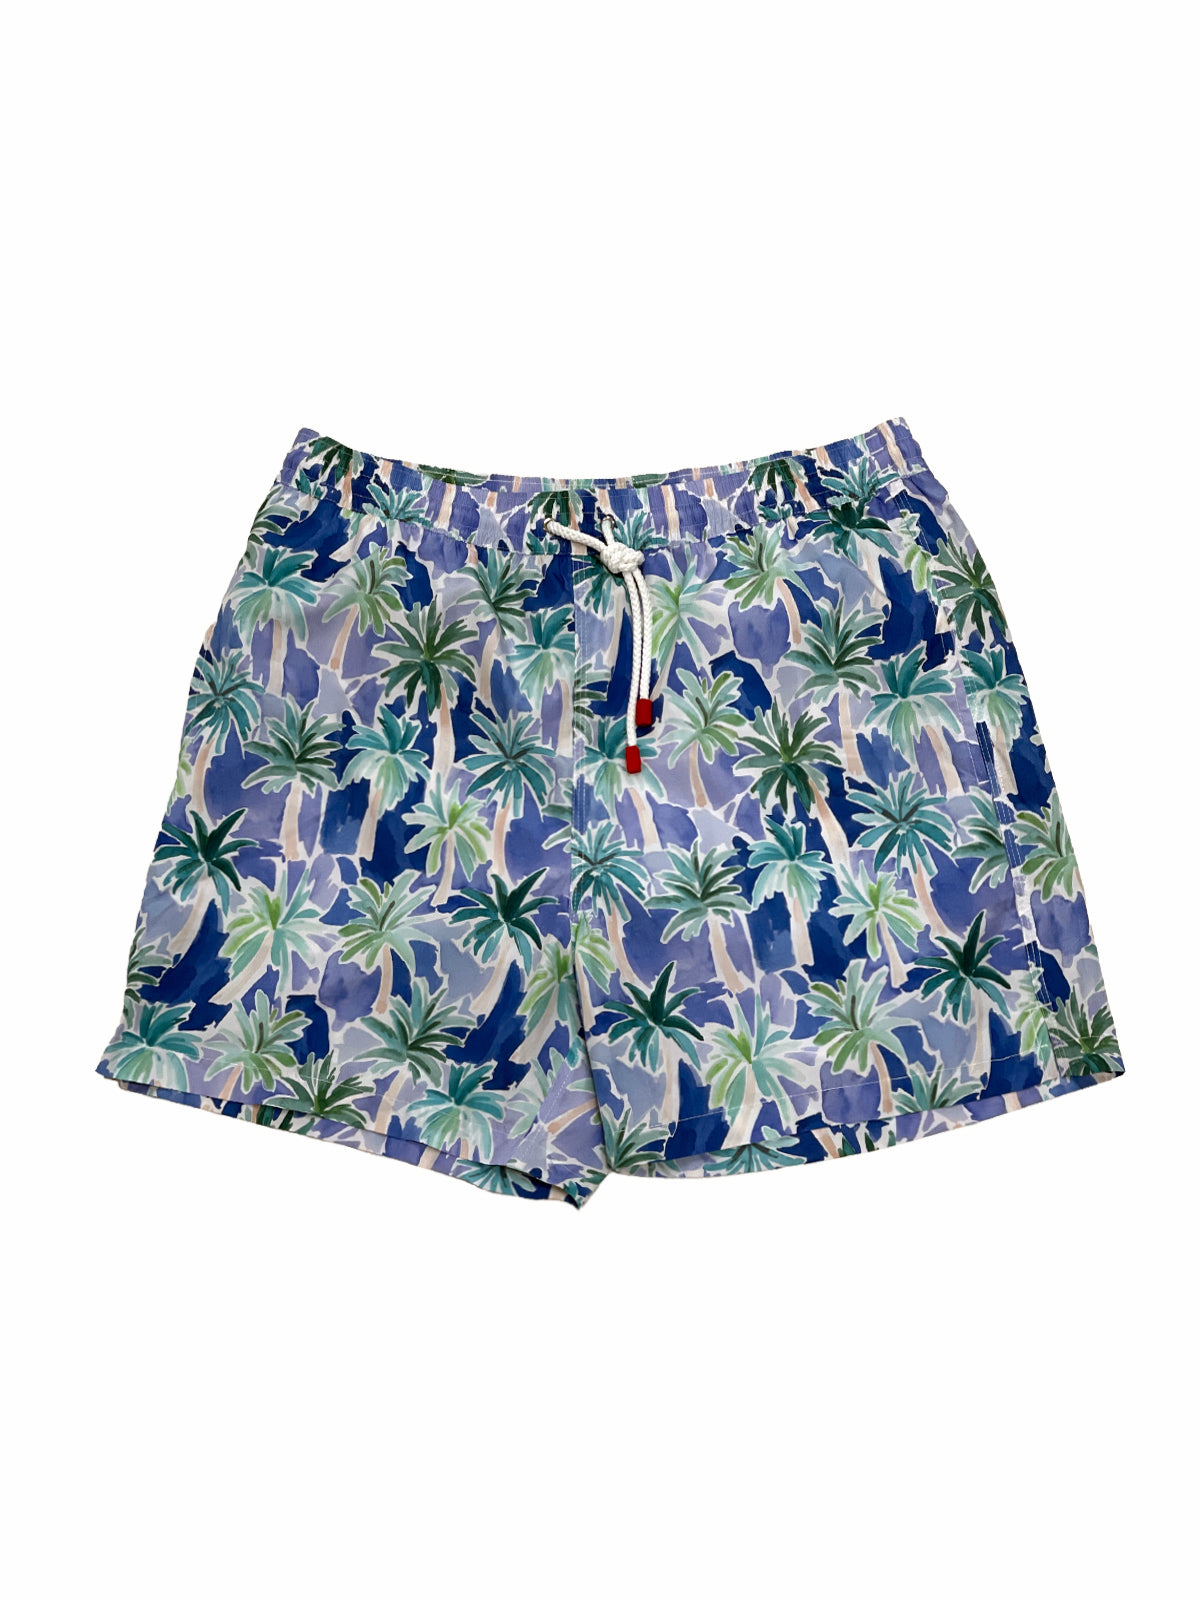 Abstract Floral Printed Swim Shorts